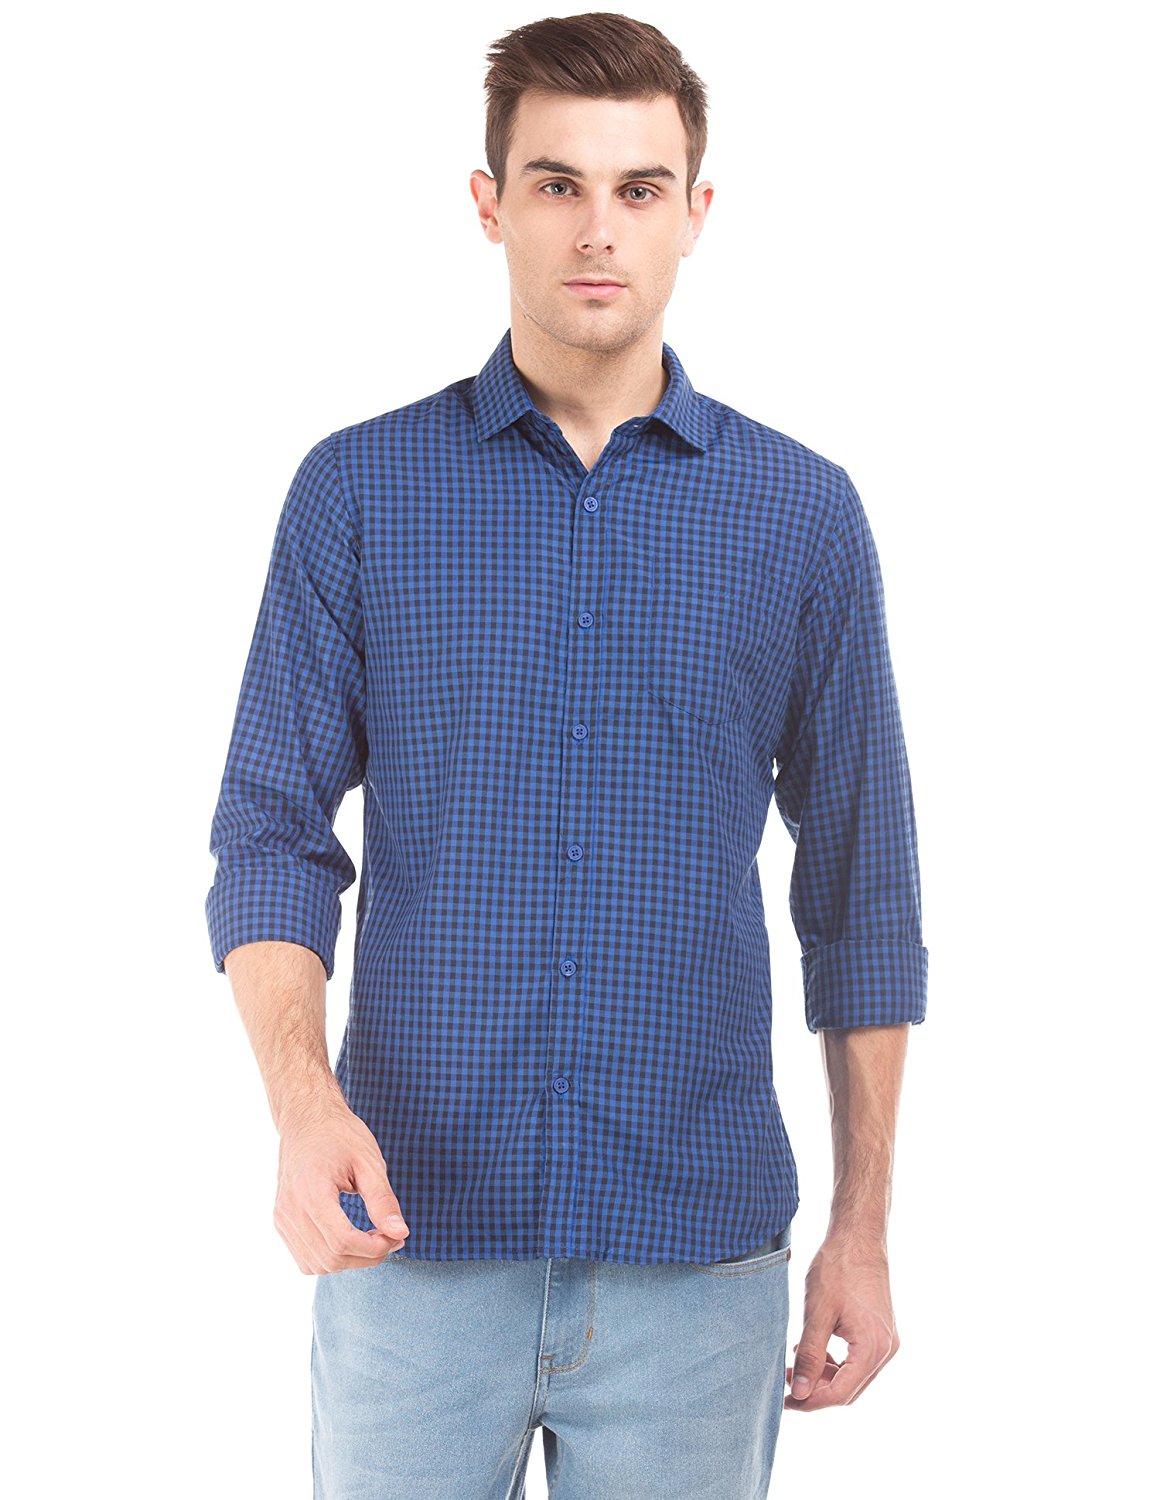 (Star Deal) Amazon Excalibur Men's Shirts In Just Rs.240 (50% Off)